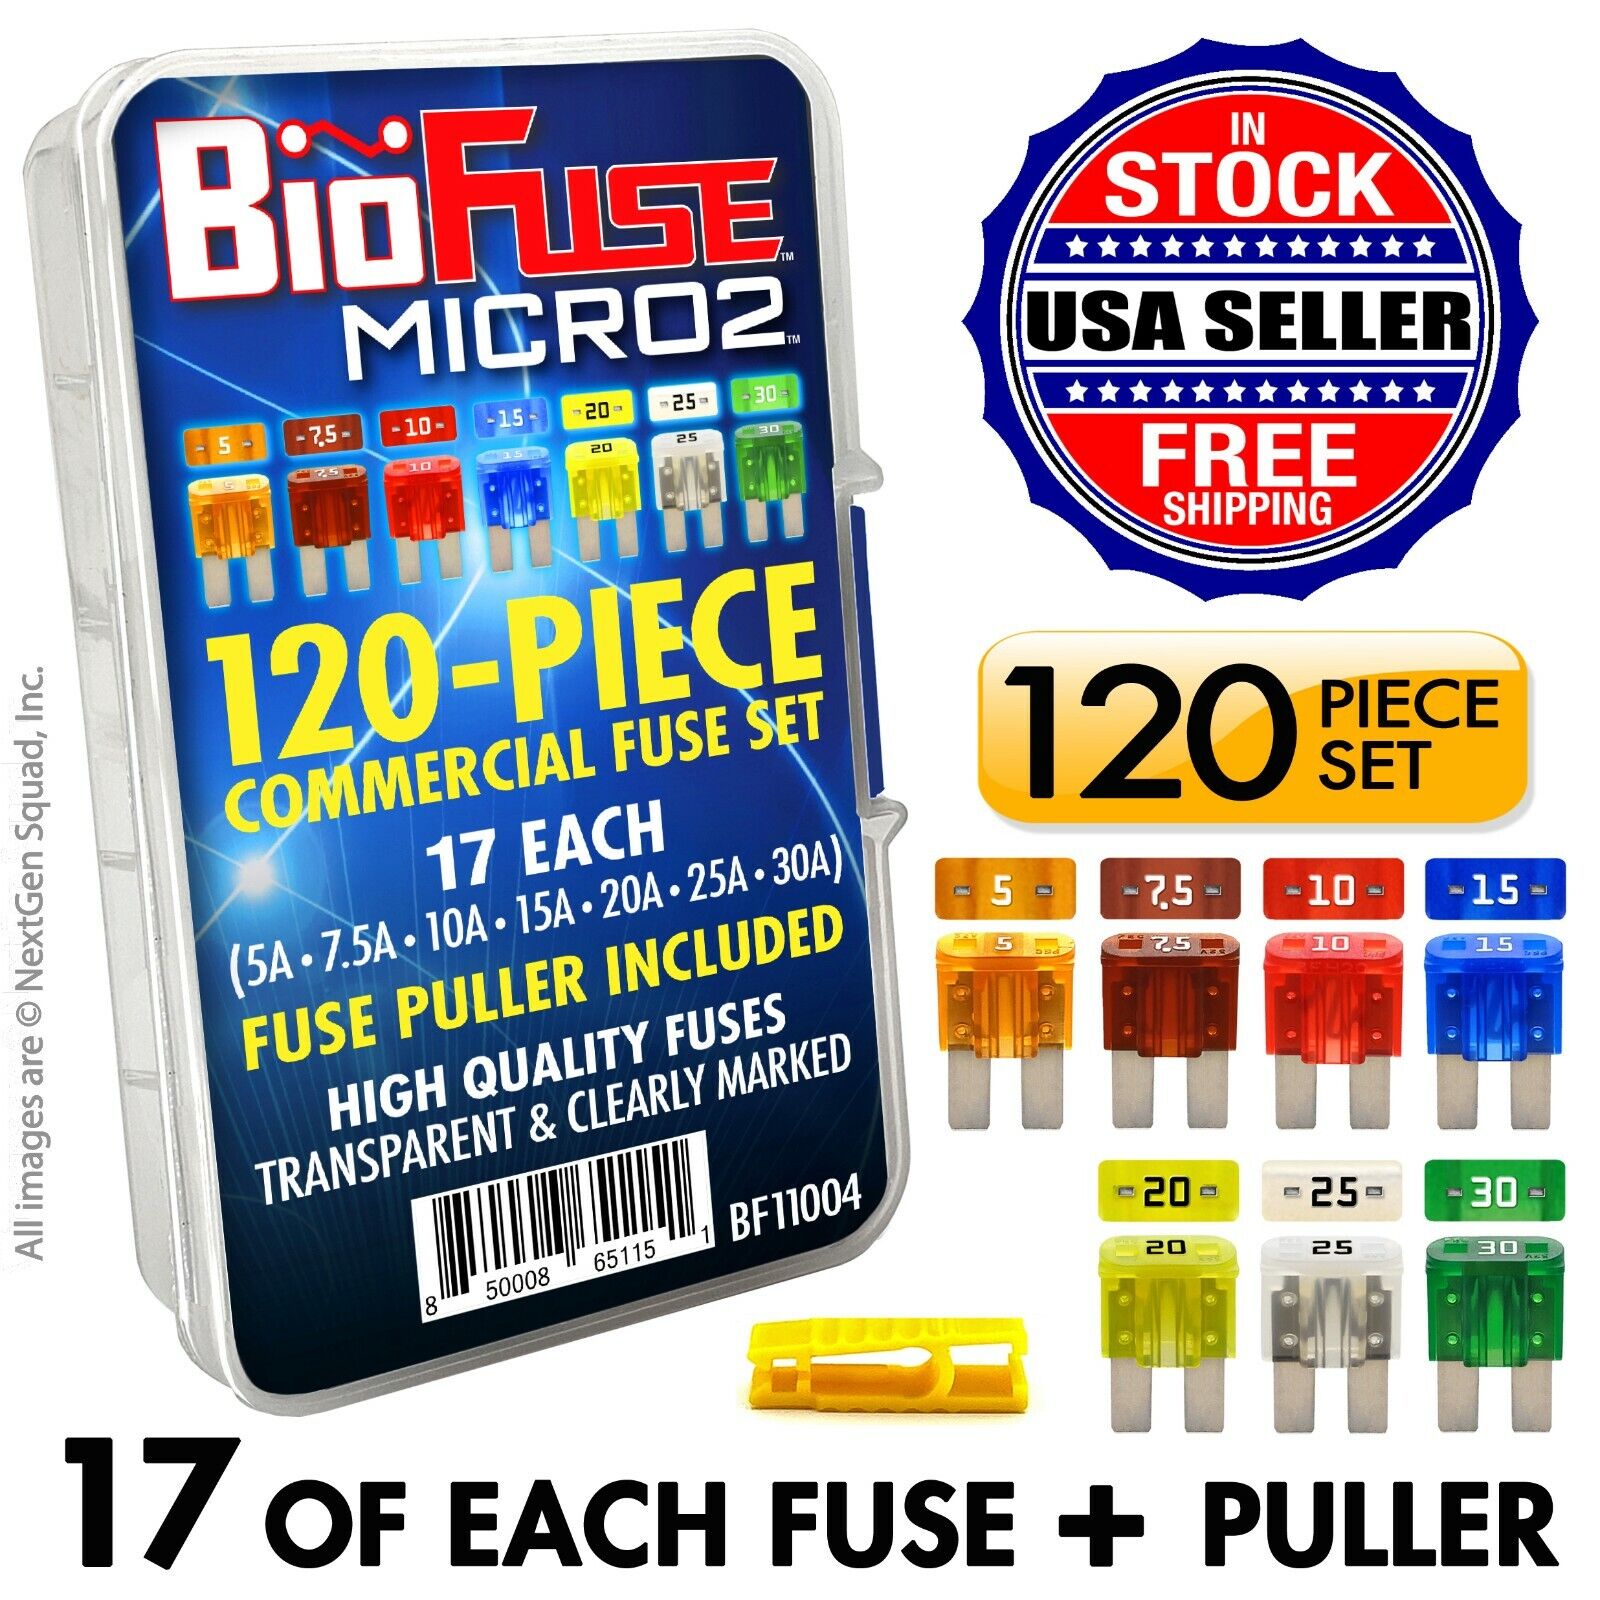 BioFuse® Micro2 120 Piece Commercial Assortment - 119 Blade Fuses + Fuse Puller